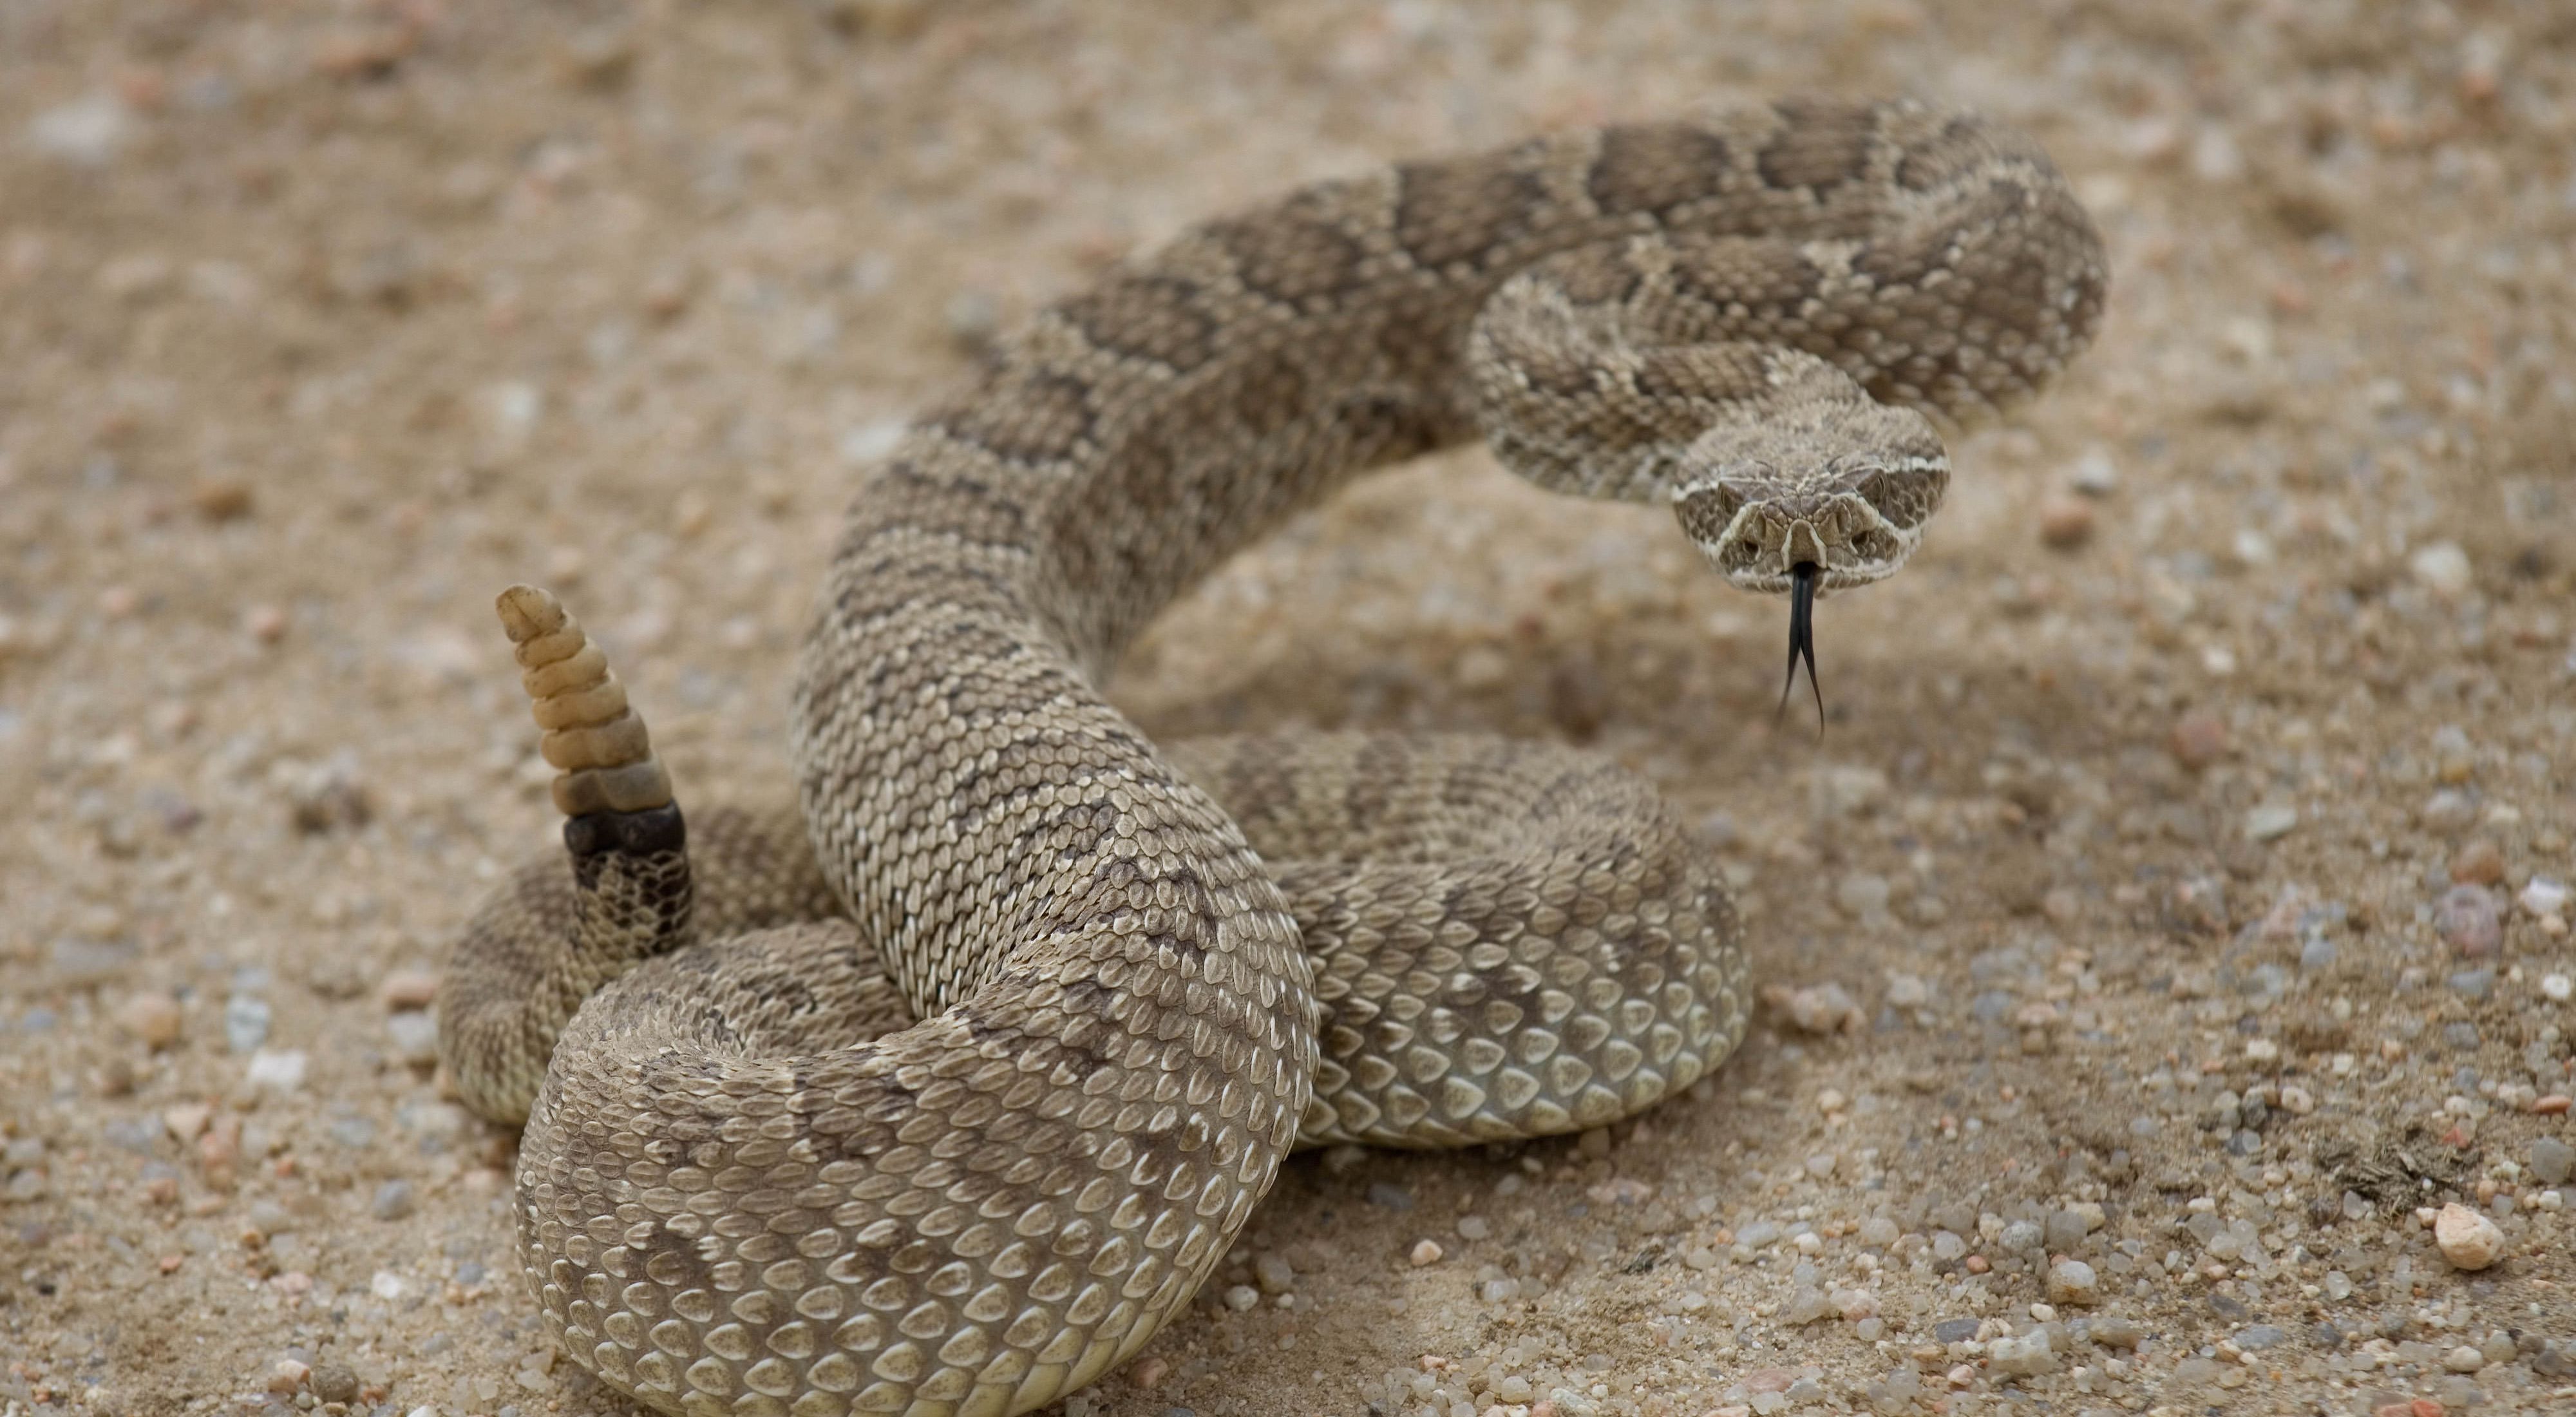 a brown snake about to strike while curled up on sand